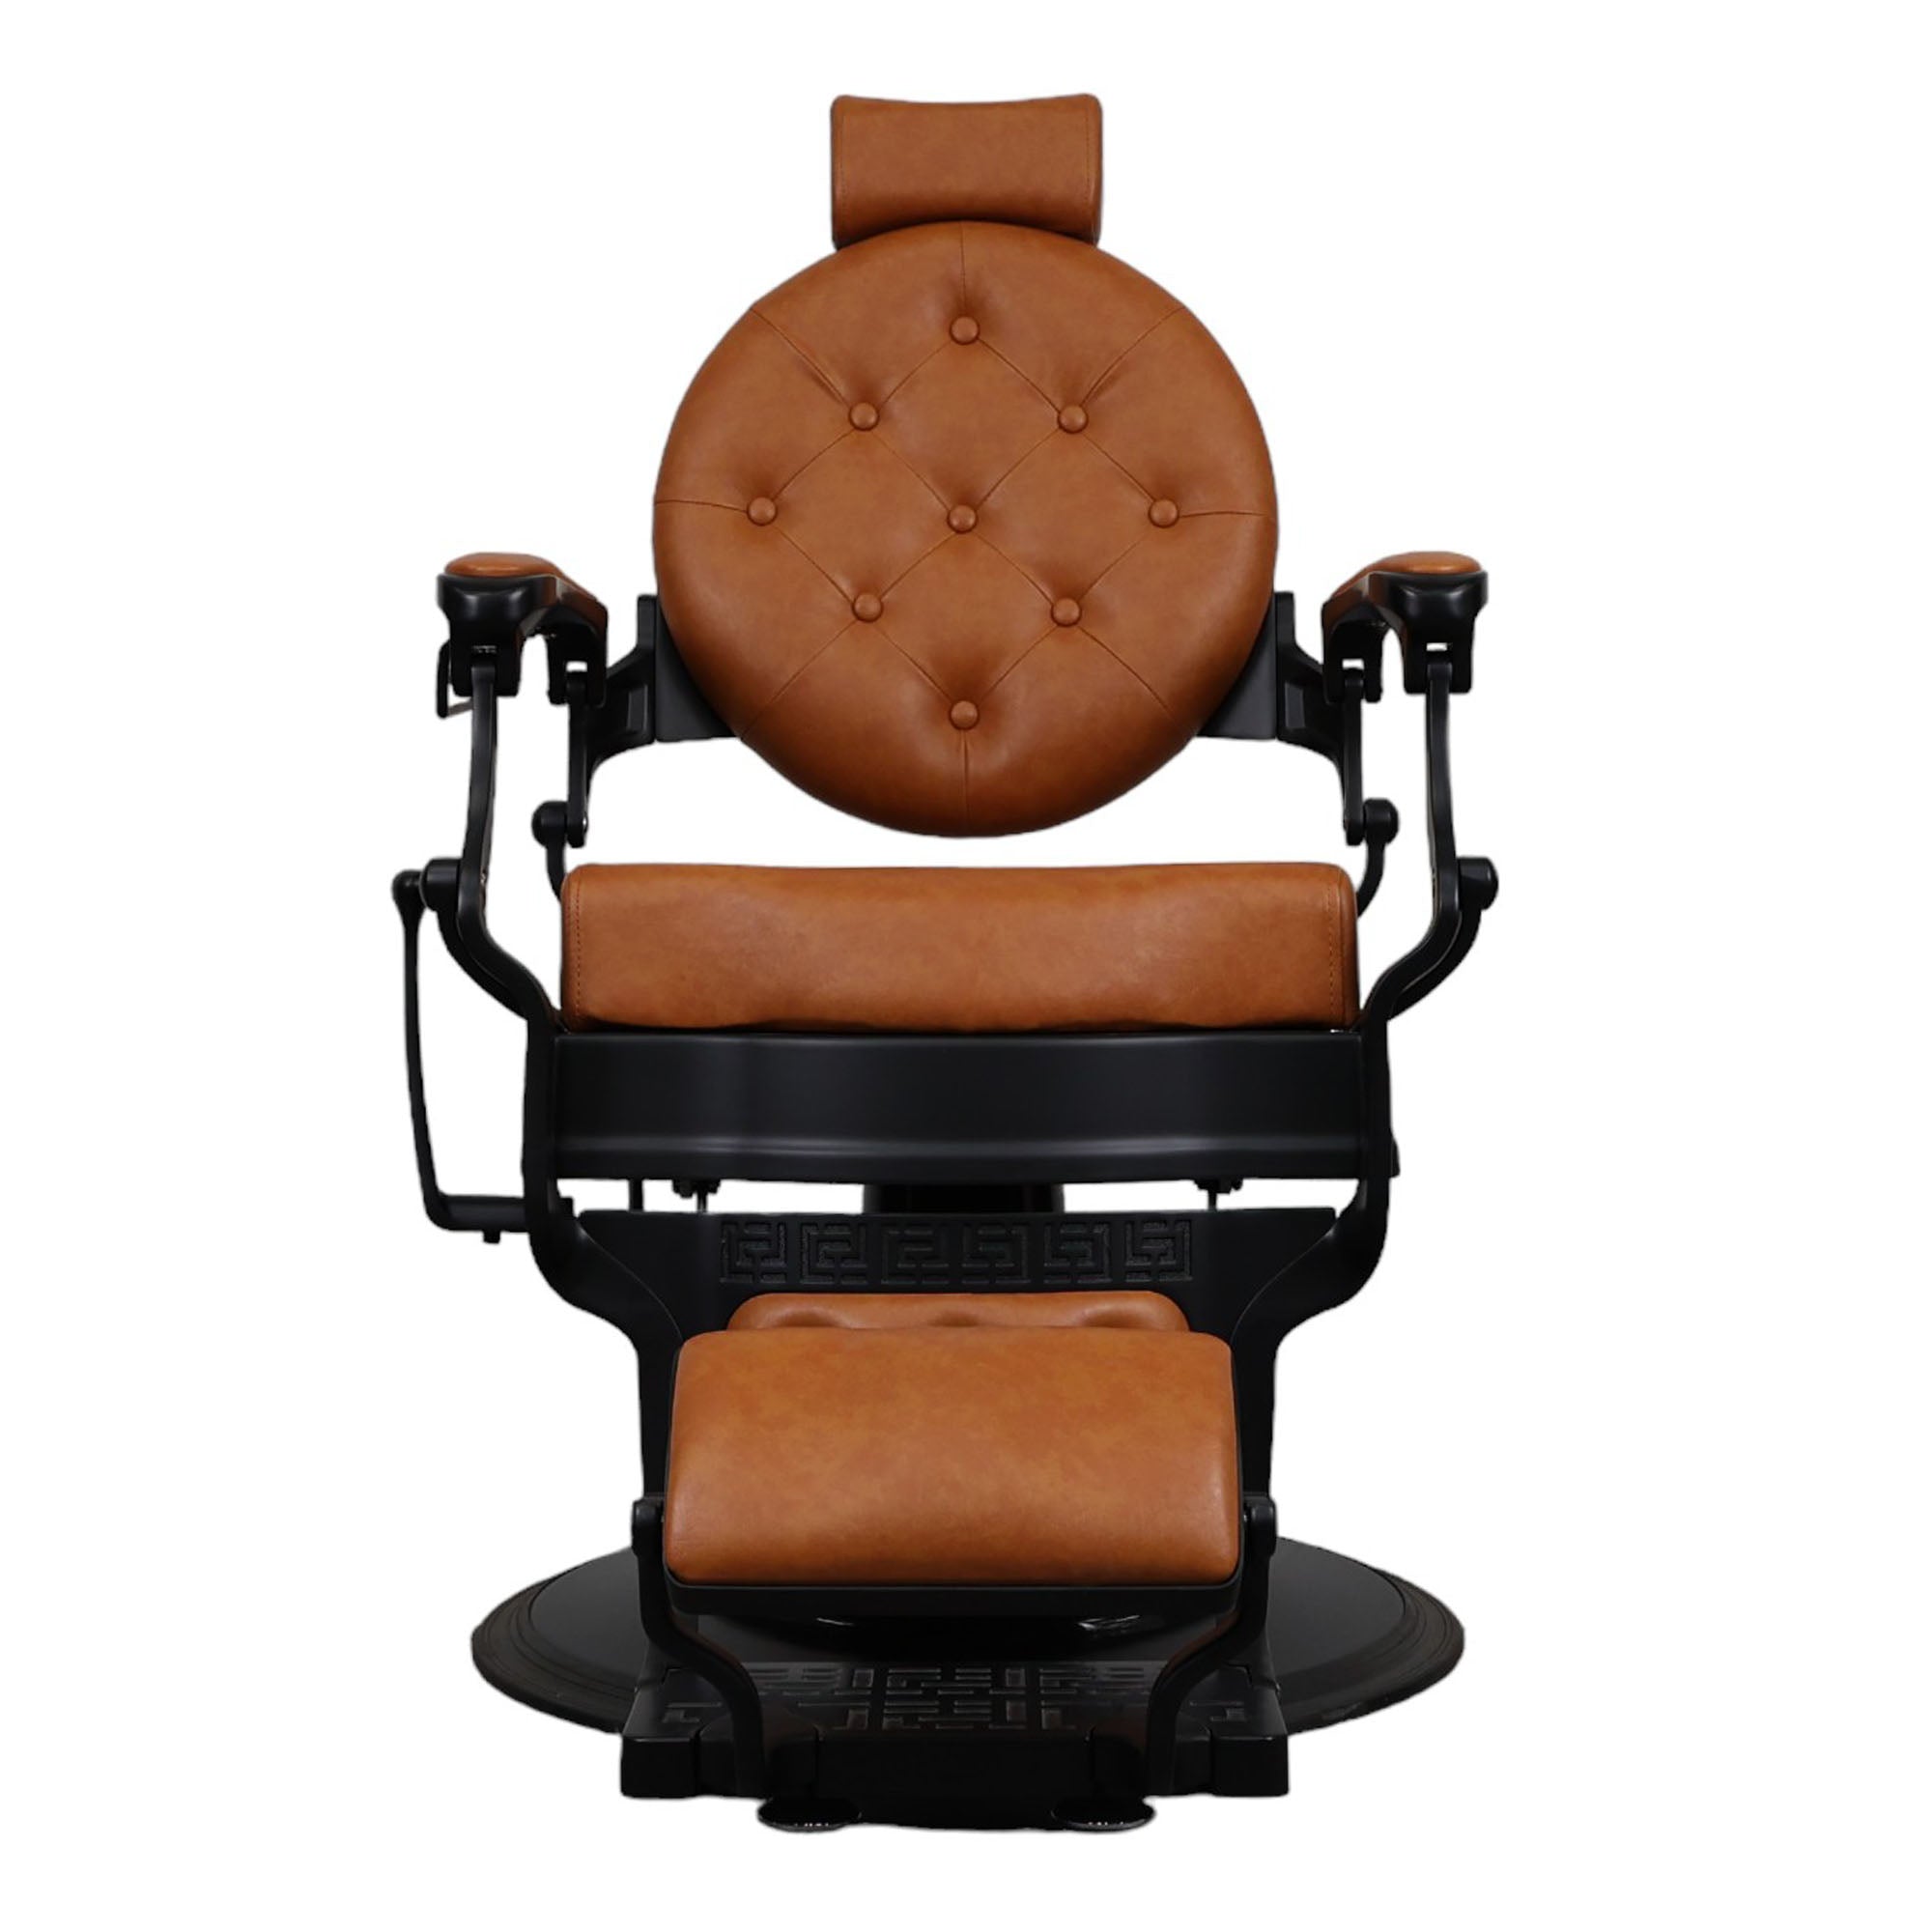 Barber Chair - Vintage Style Brown Leather with Black Accents